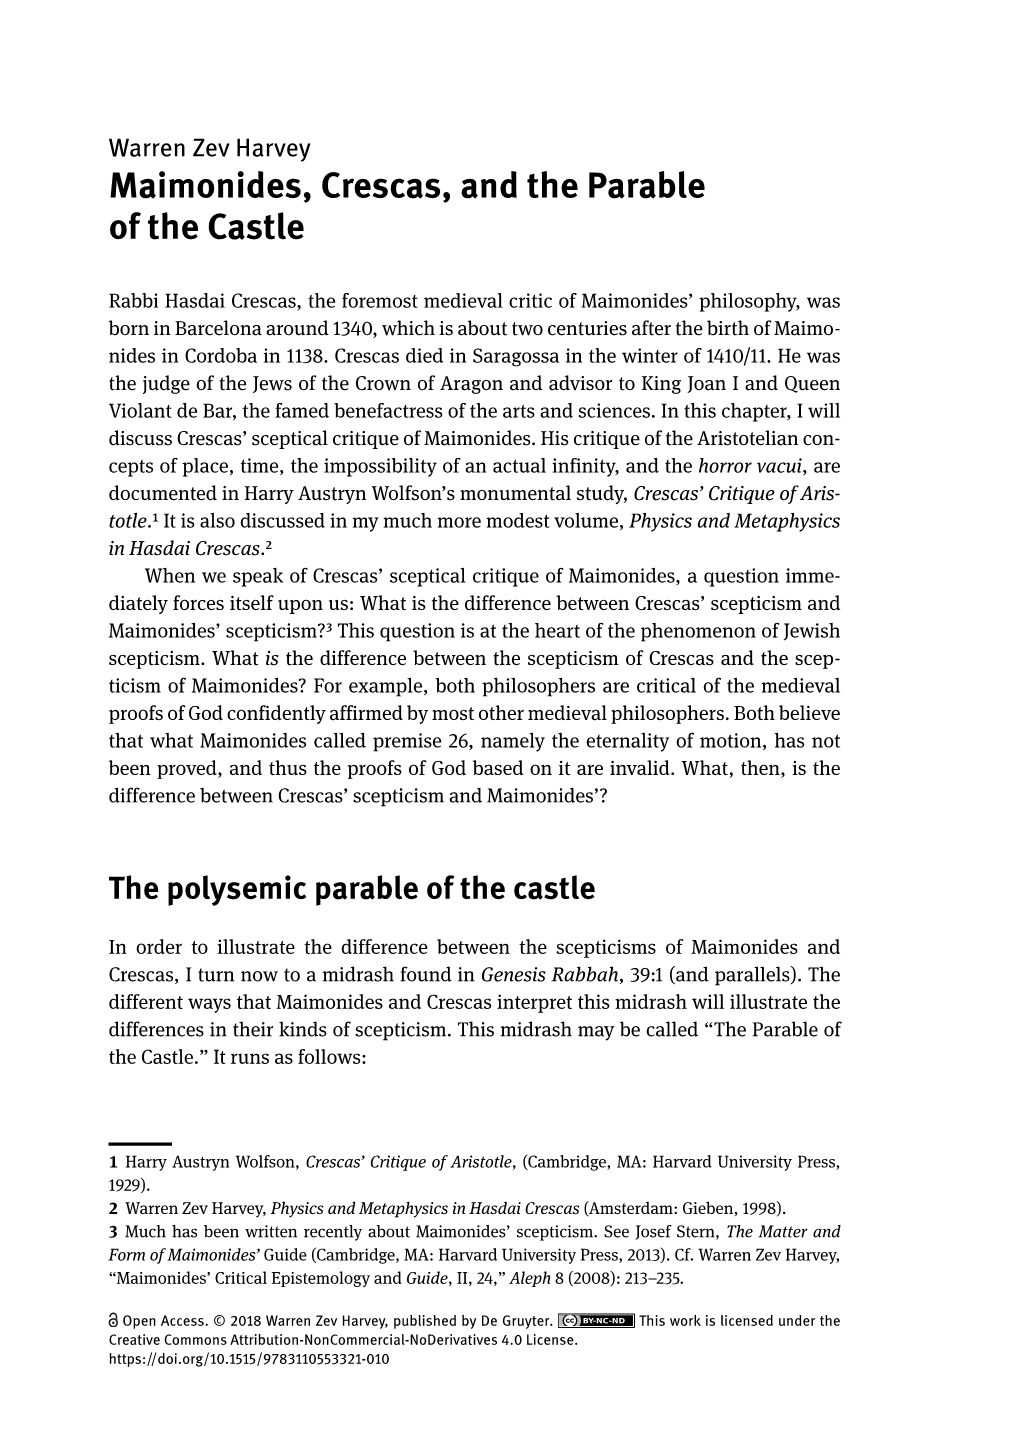 Maimonides, Crescas, and the Parable of the Castle